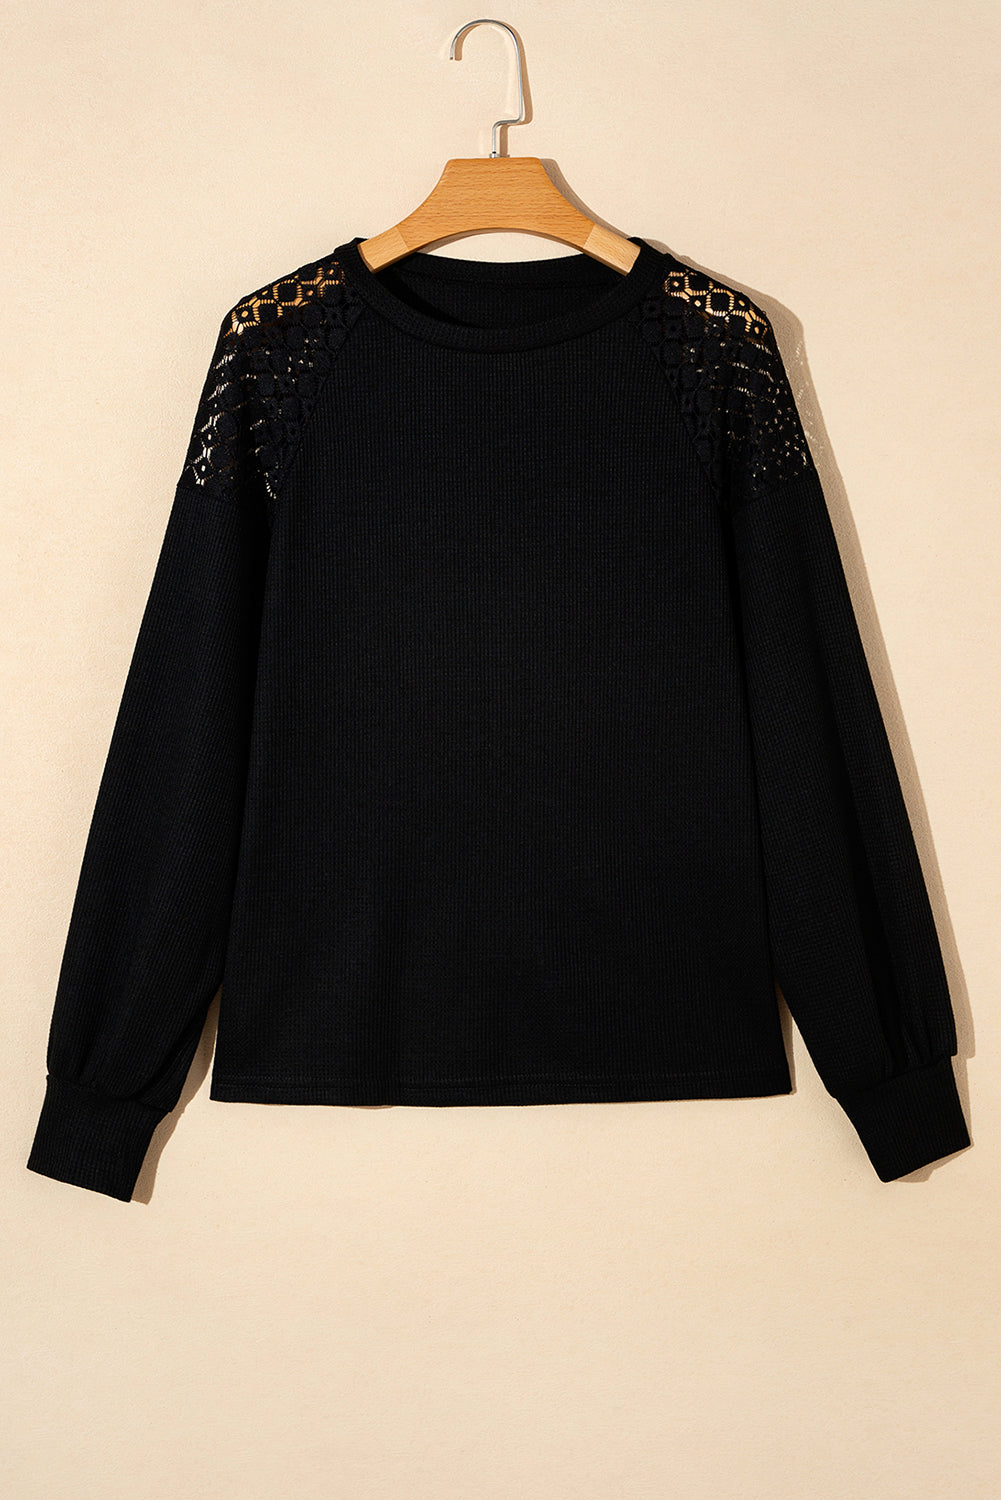 Black Lace Long Sleeve Textured Pullover